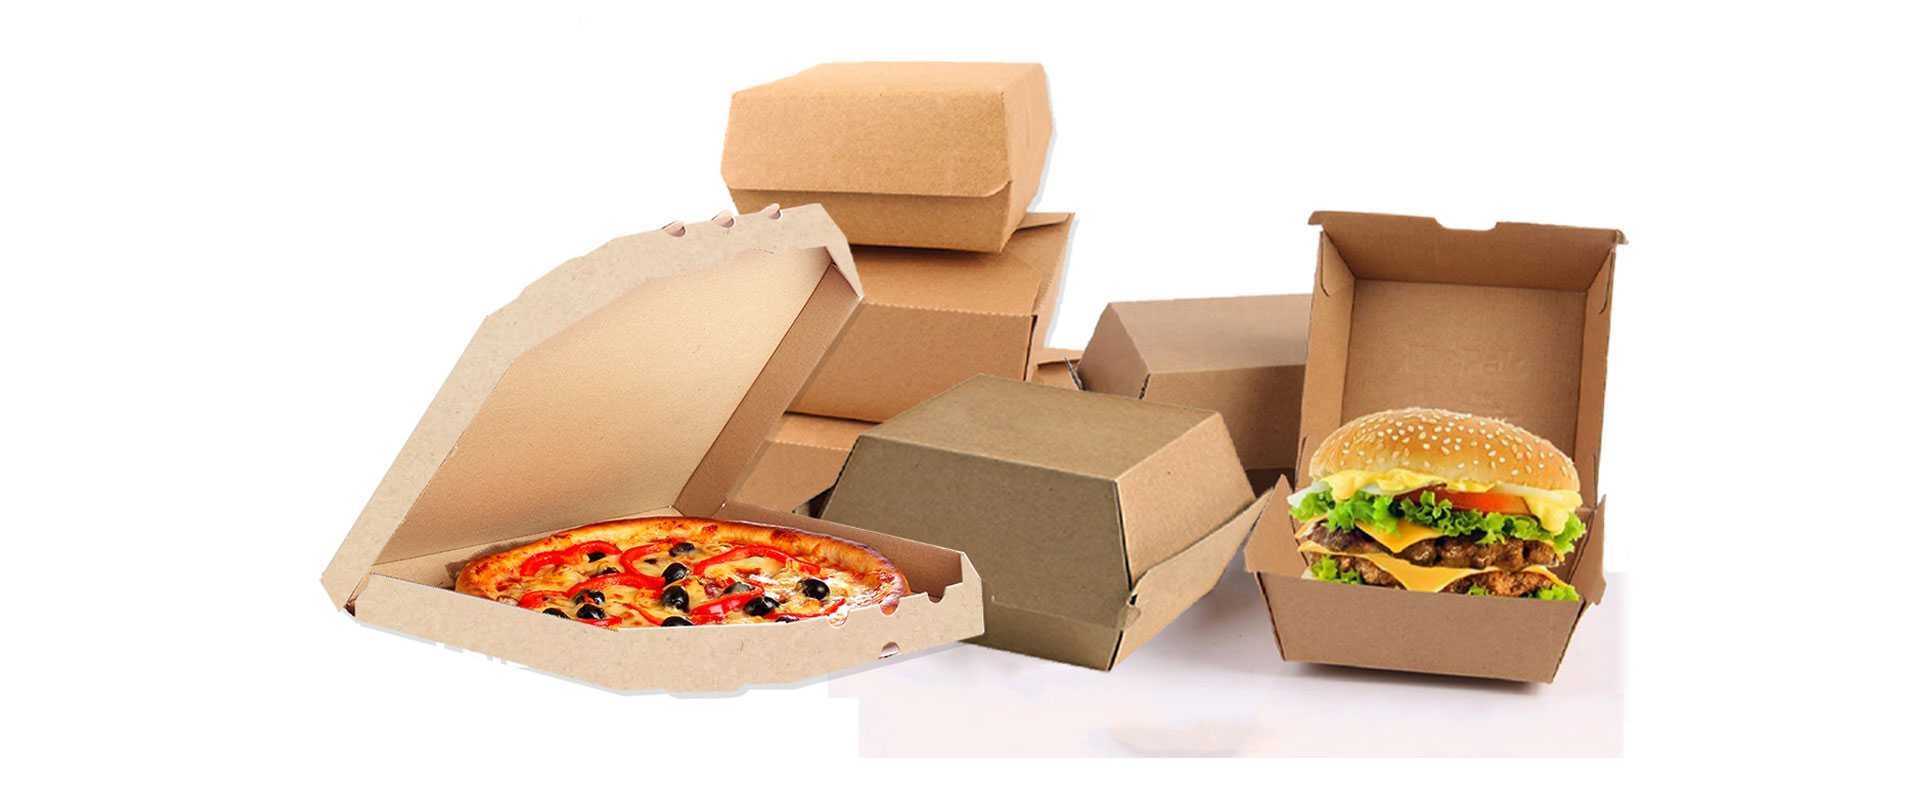 Disposable packaging materials